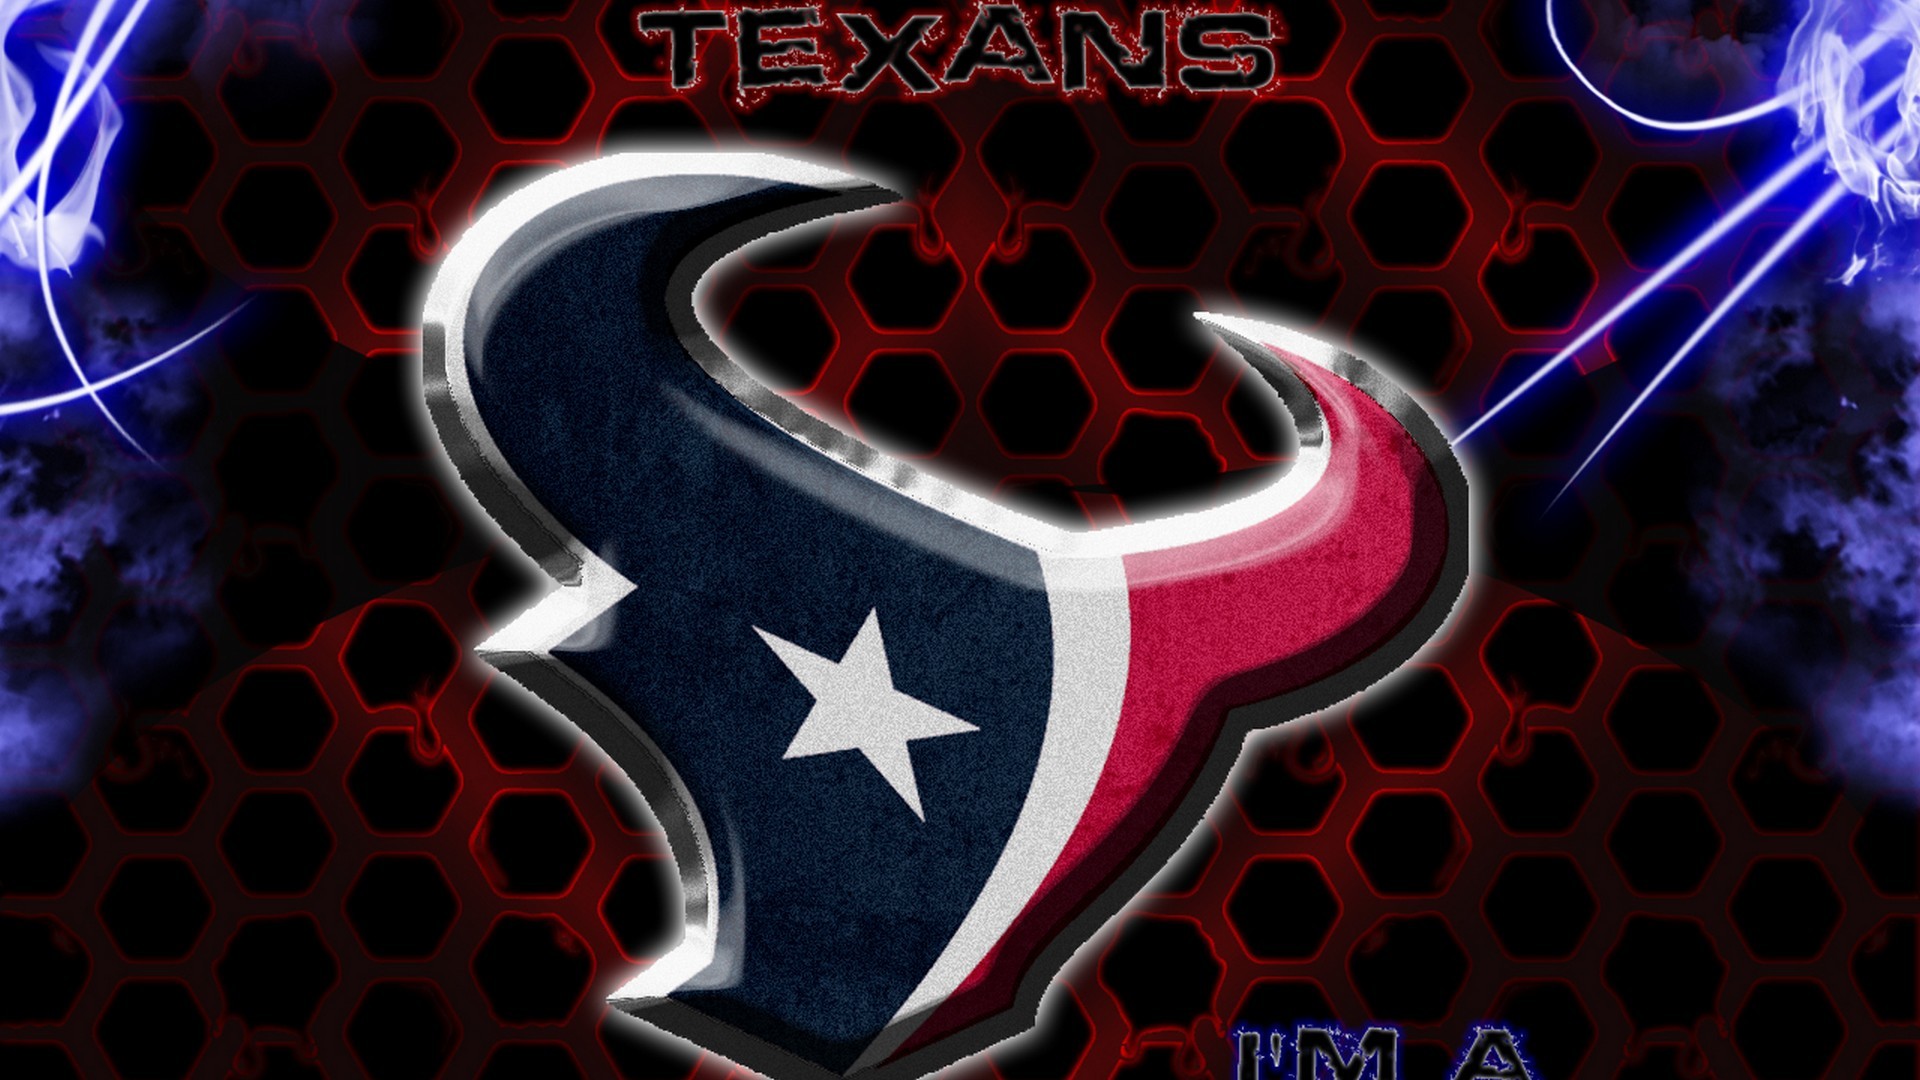 1920x1080 Houston Texans NFL Wallpaper For Mac Backgrounds with resolution   pixel. You can make this